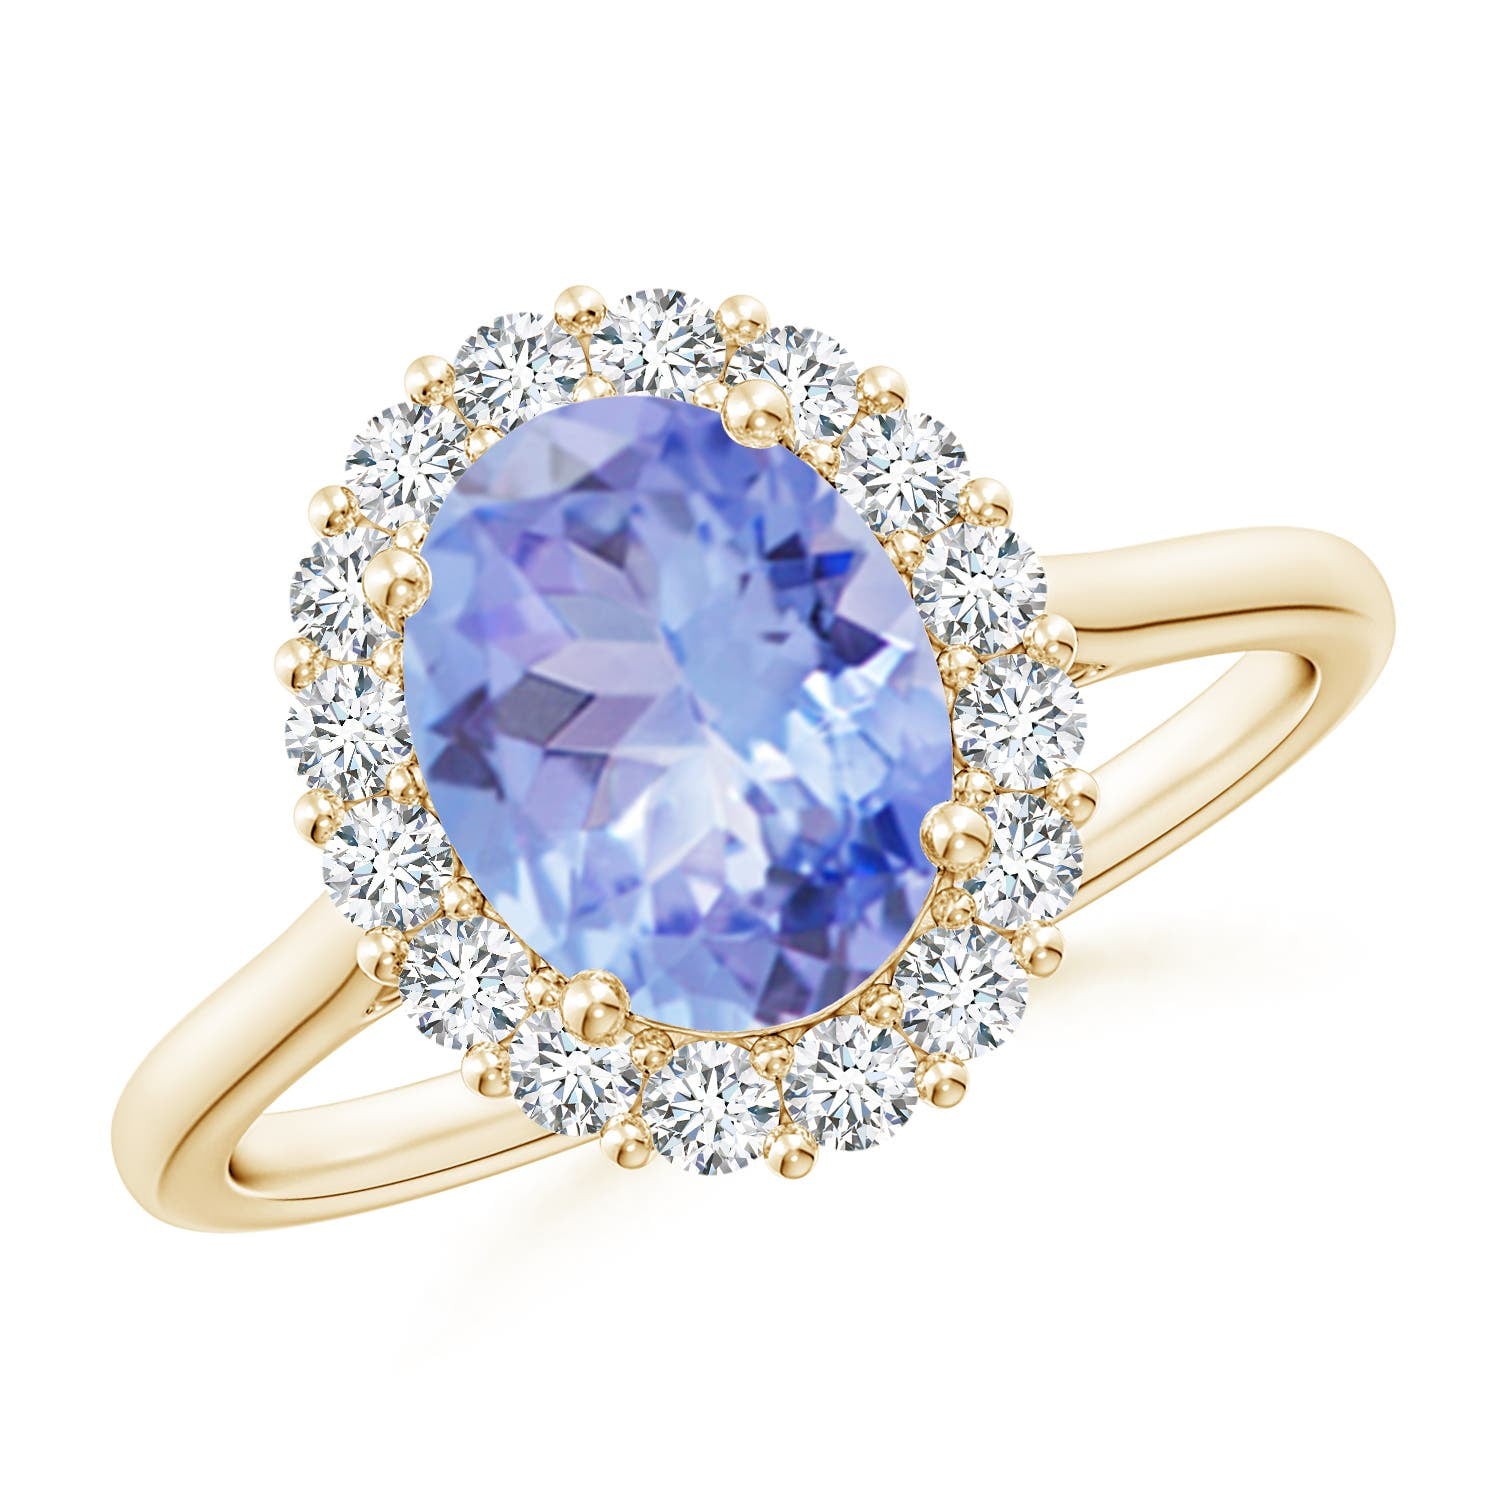 ANGARA Natural Tanzanite with Diamond Halo Ring in 14K Yellow Gold for  Women, Girls Ring Size-12.5 (Stone Grade: Heirloom-AAAA, Size-7x5mm)  December Birthstone Jewelry Gift for Her Birthday Wedding - Walmart.com